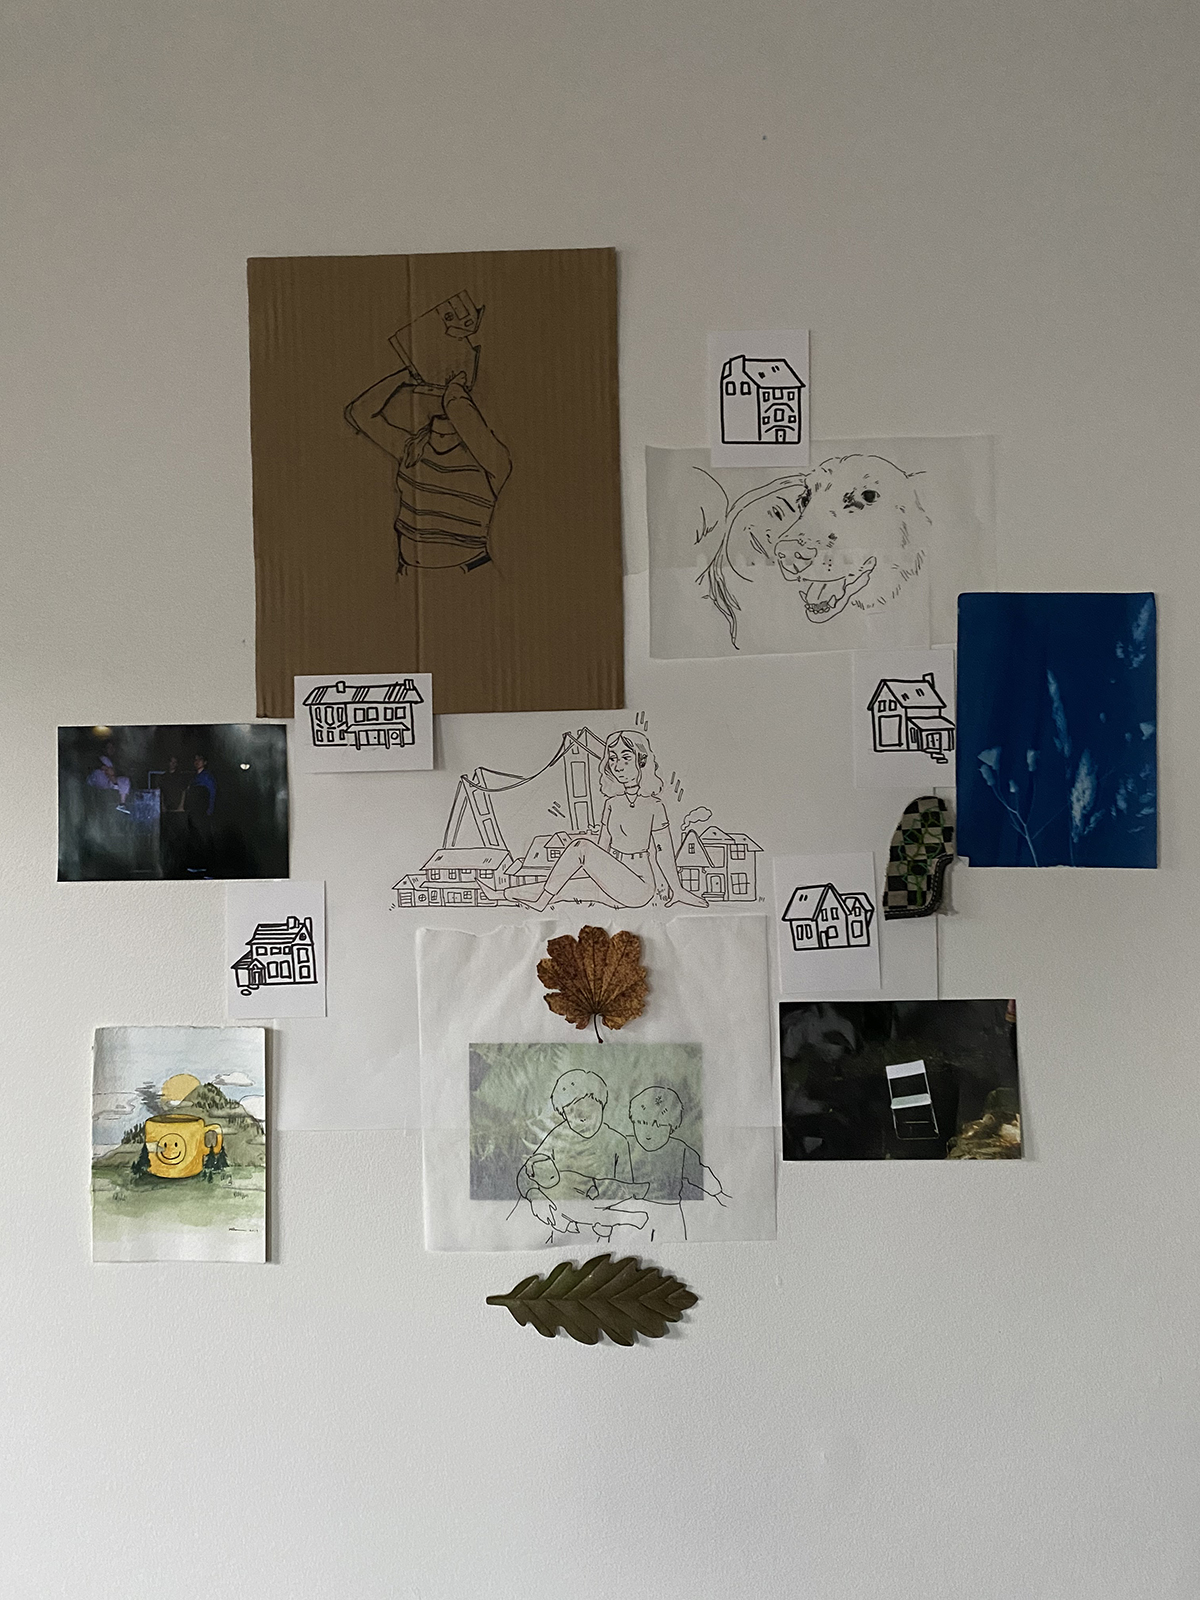 Grouping of drawings, paintings, and graphic artworks on a different sheets of paper